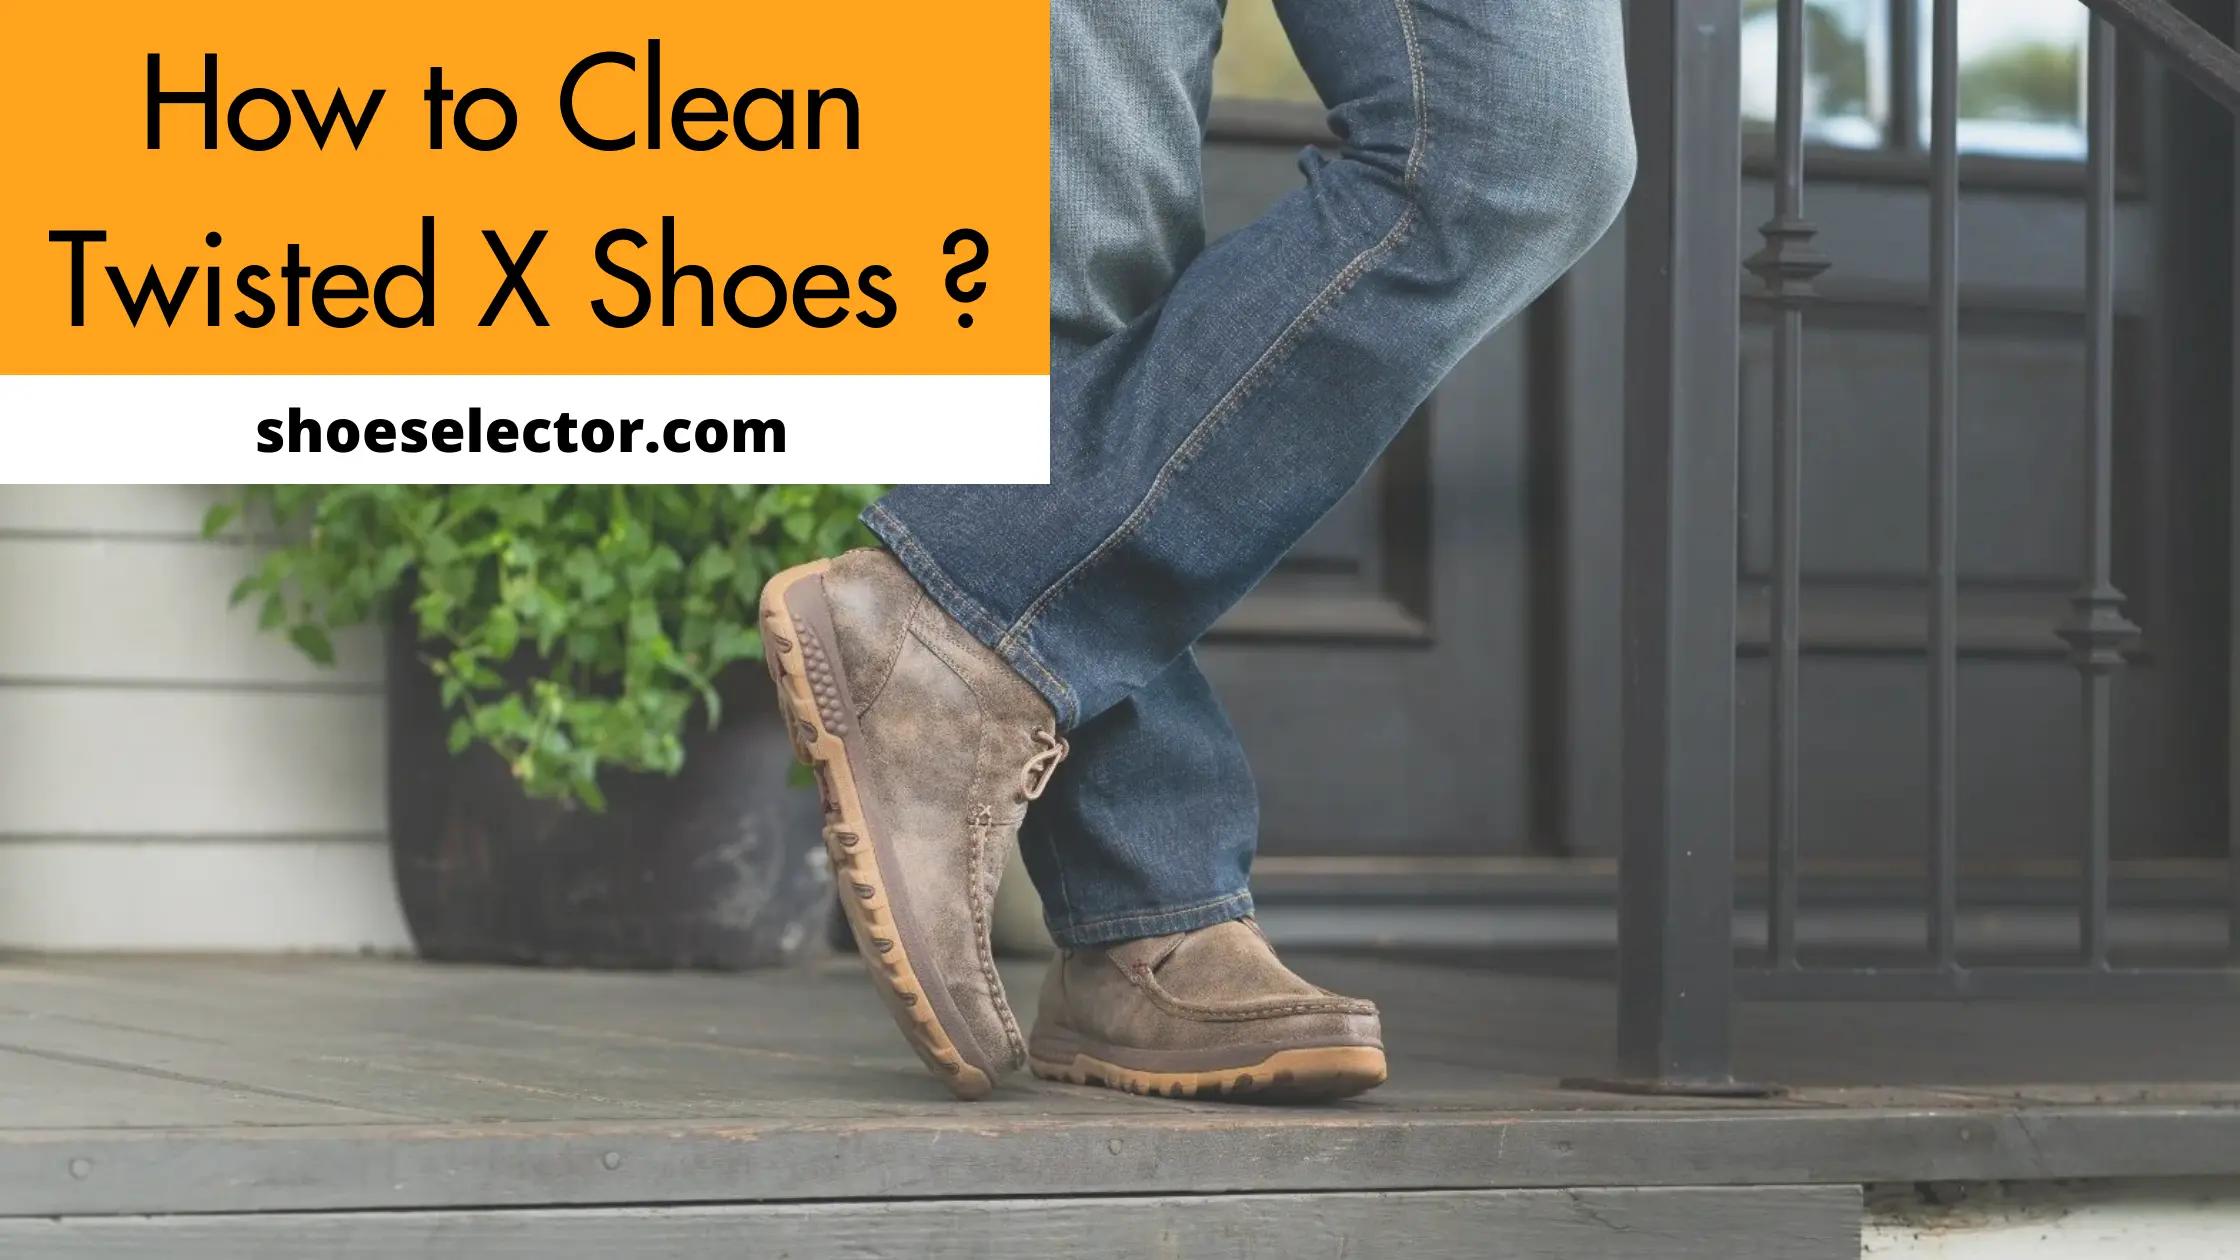 How to Clean Twisted x Shoes? - Easy And Pro Guide